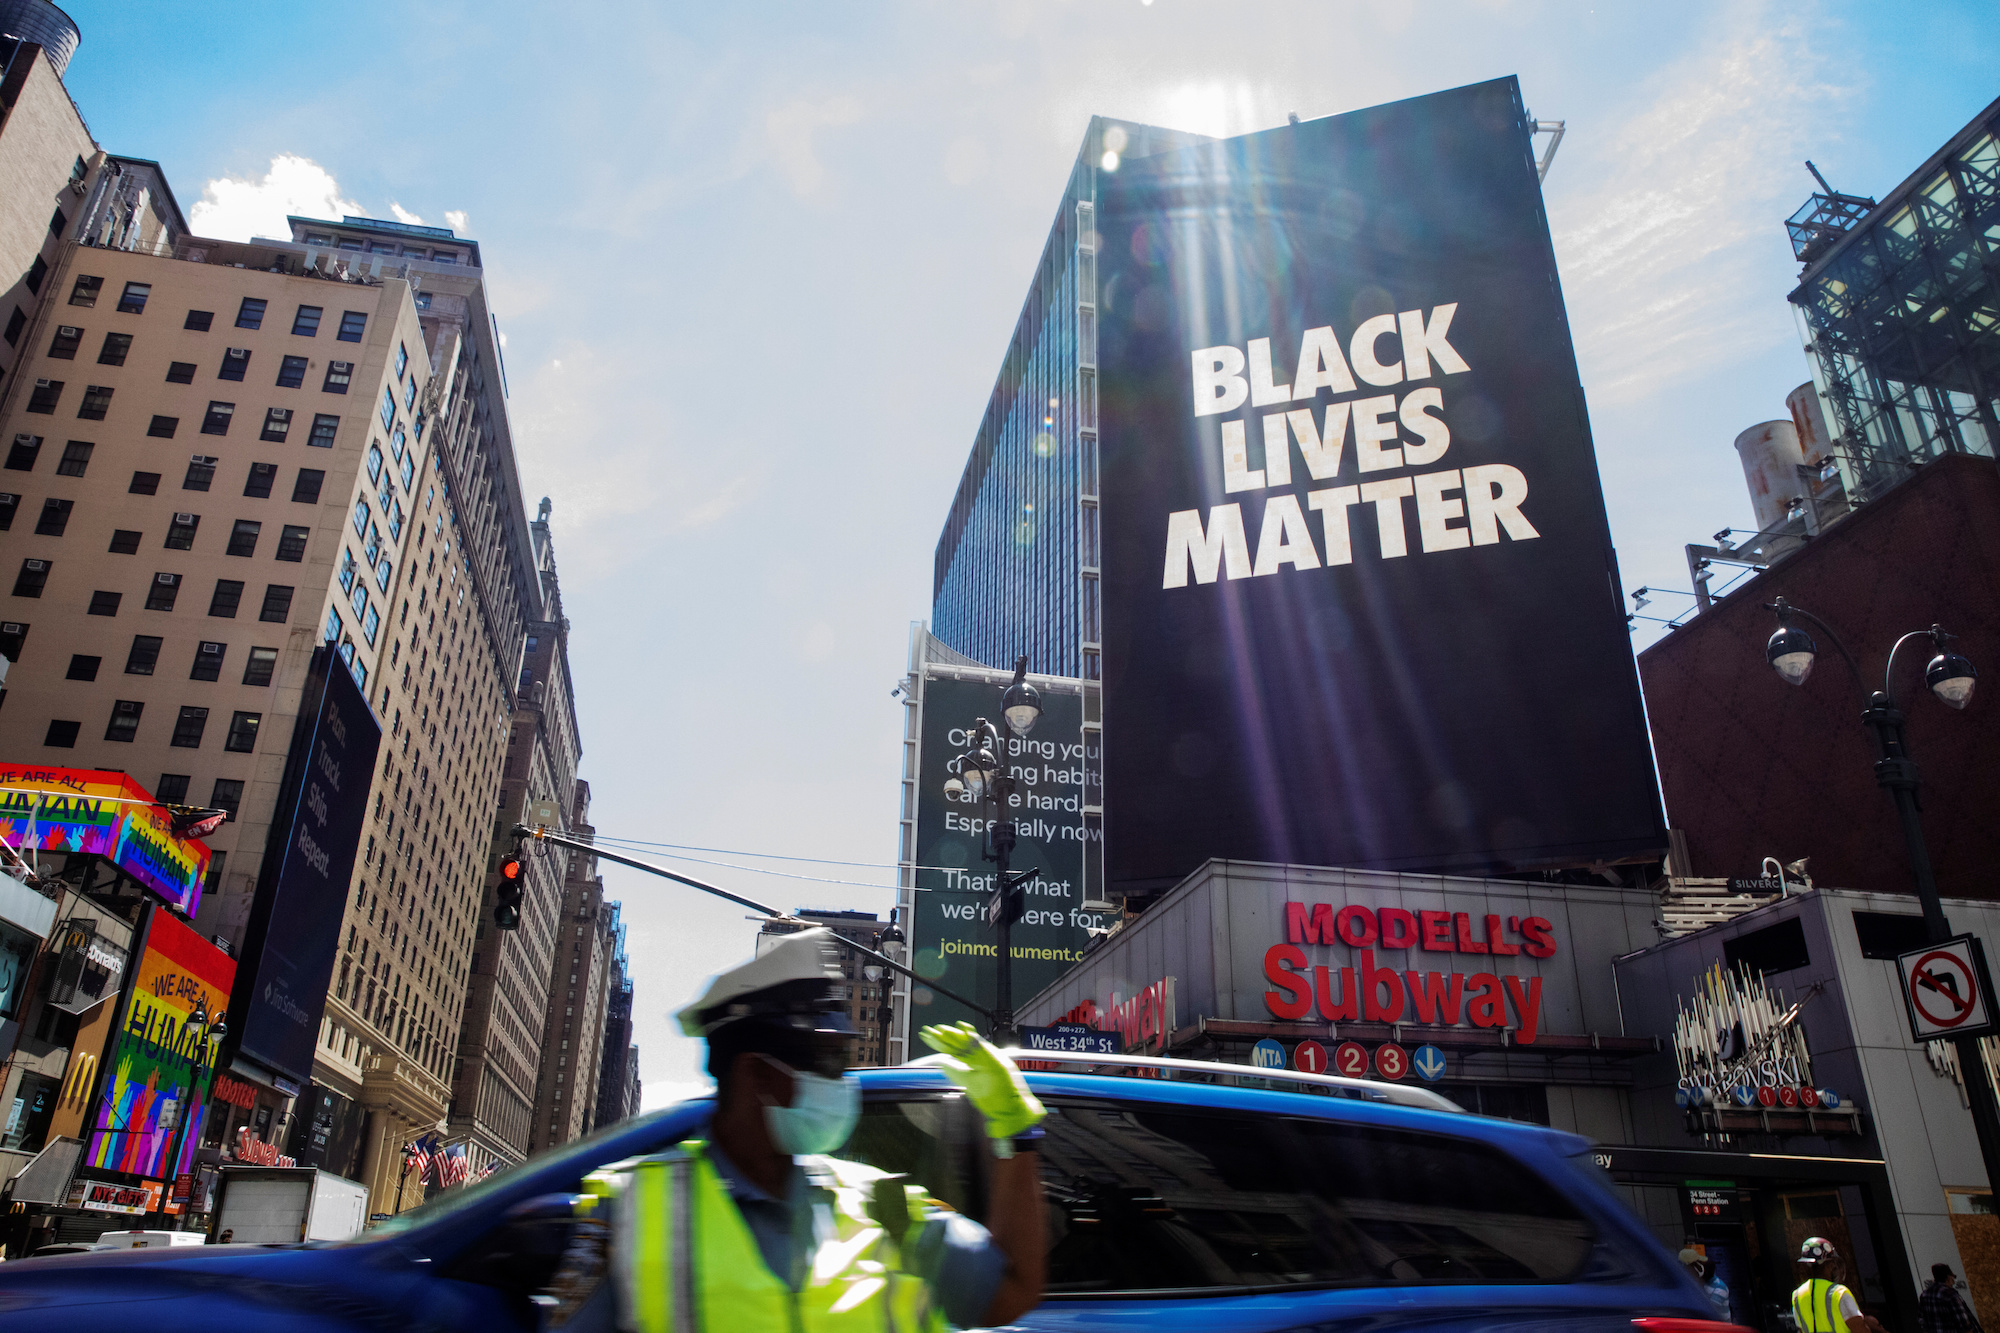 Big screen reading "Black Lives Matter" on a building in New York City